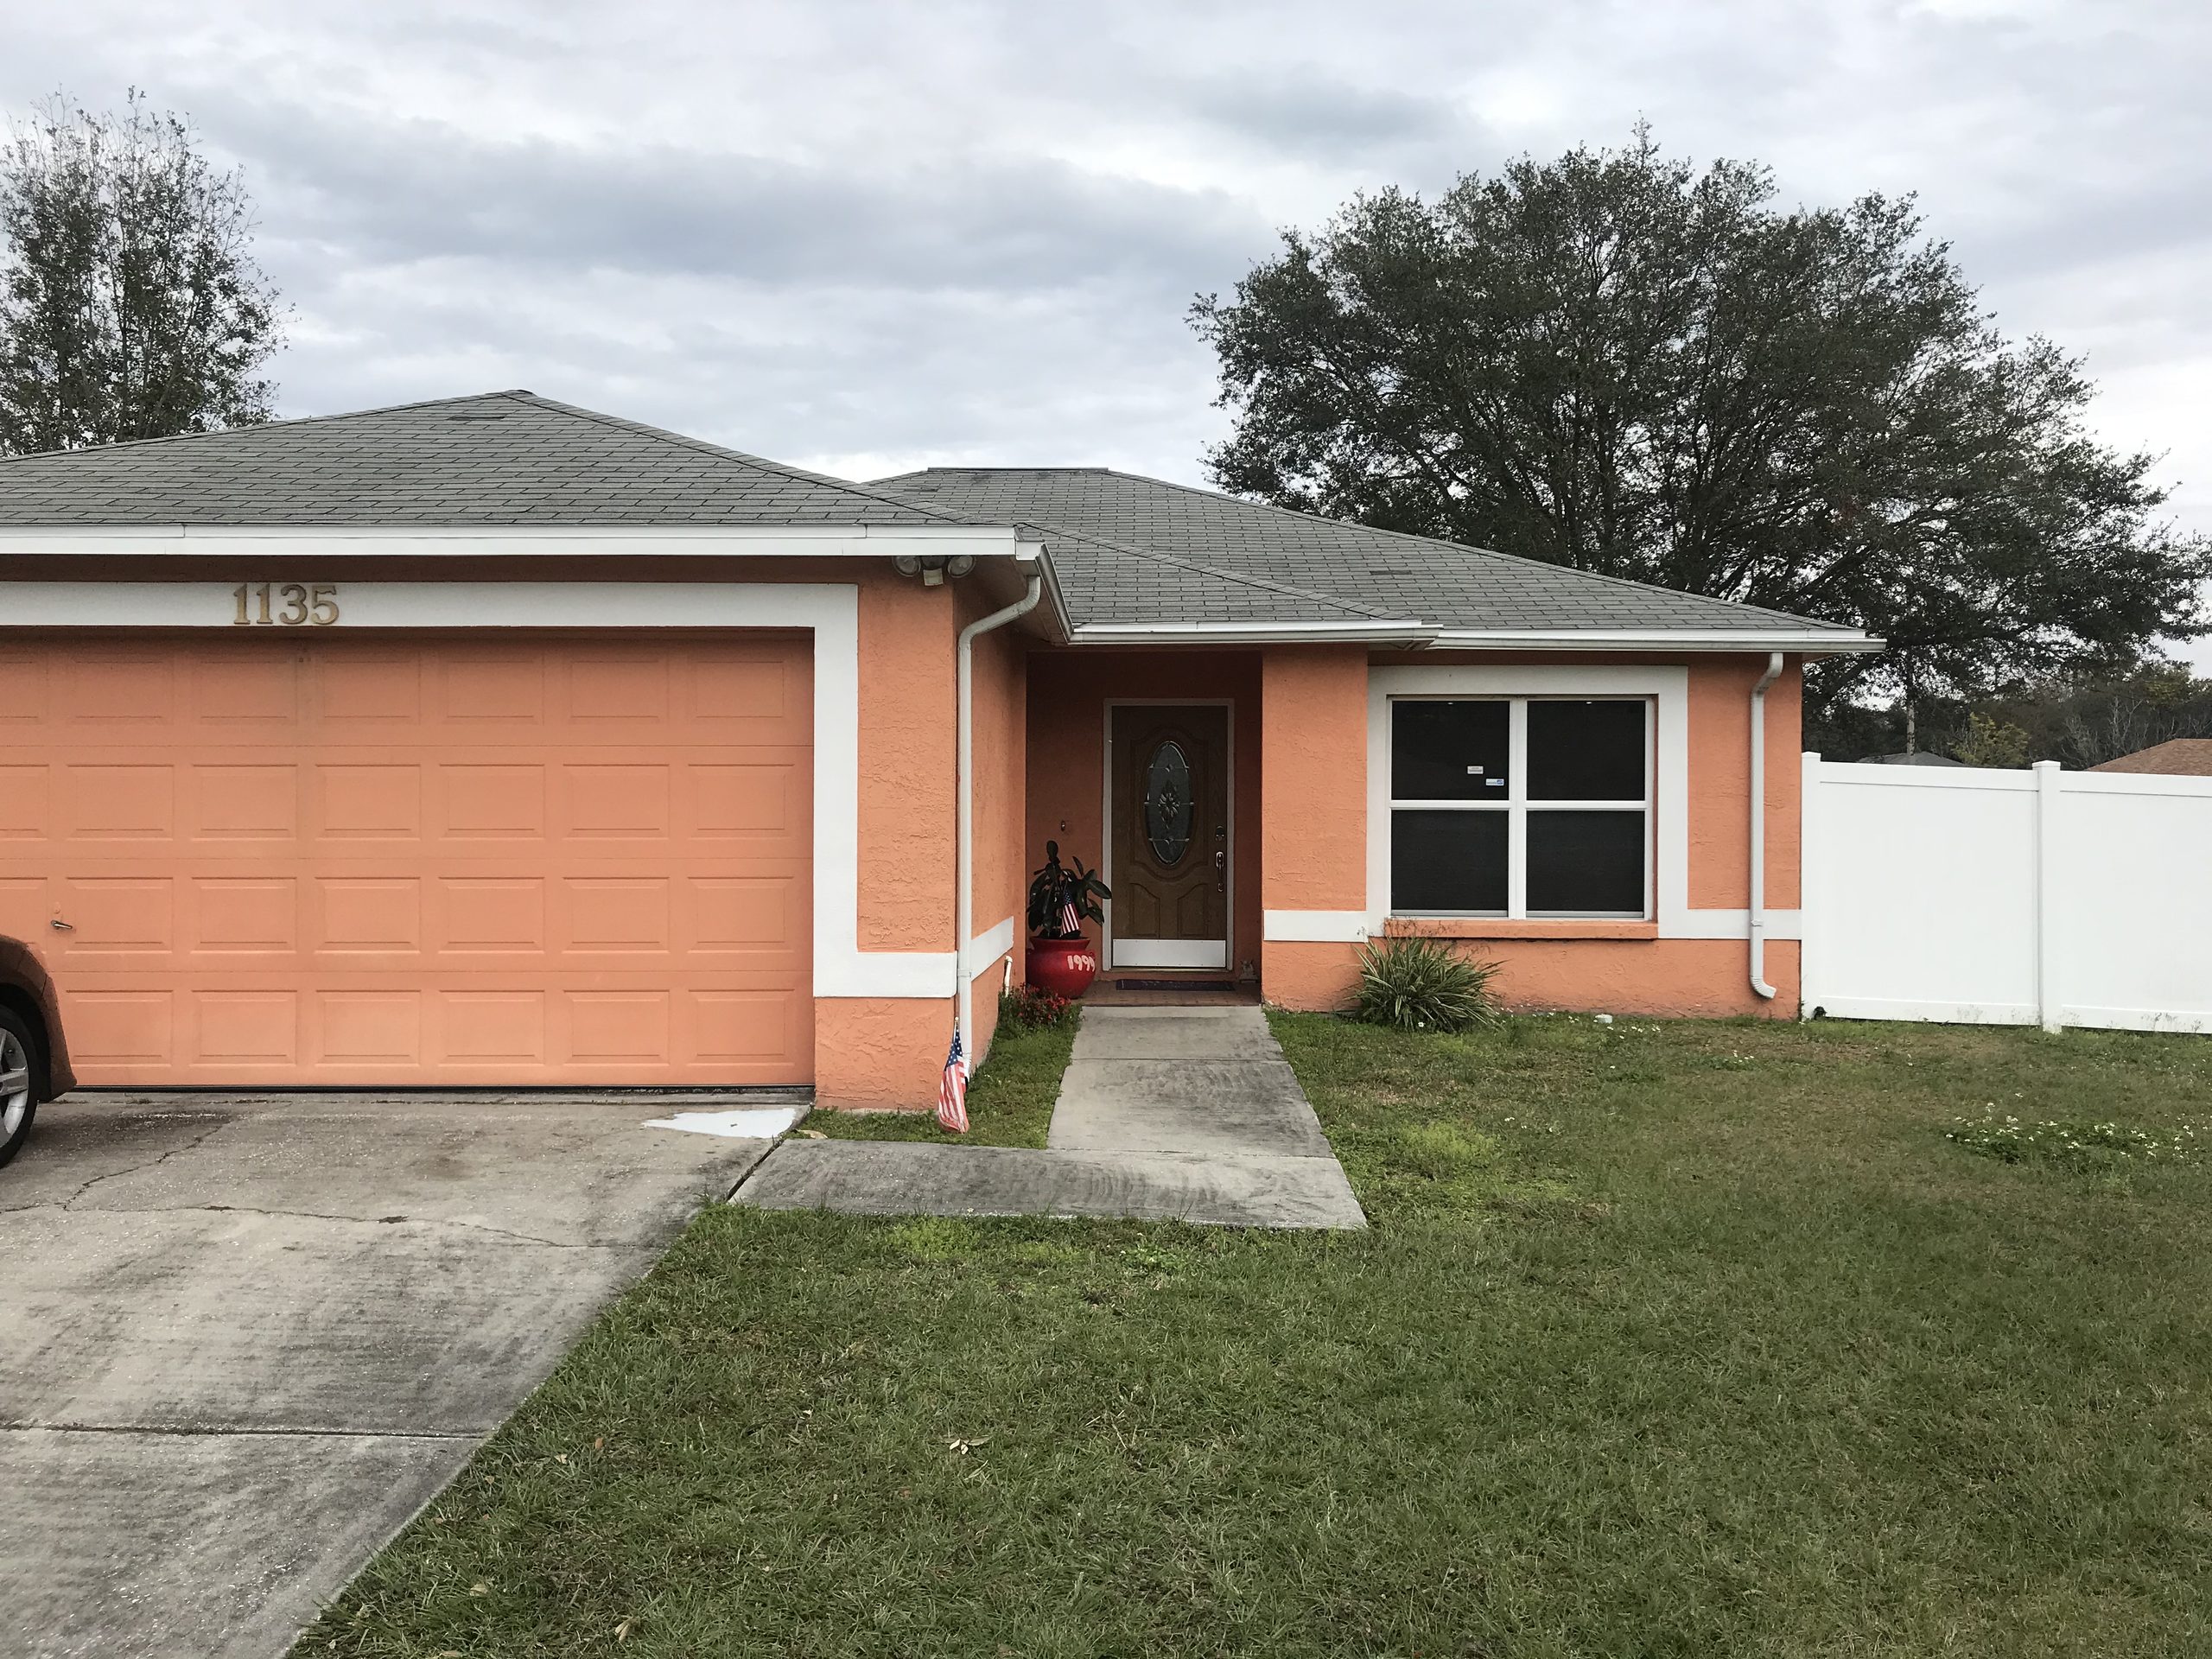 1135 S 69th St Tampa FL 33619 - front